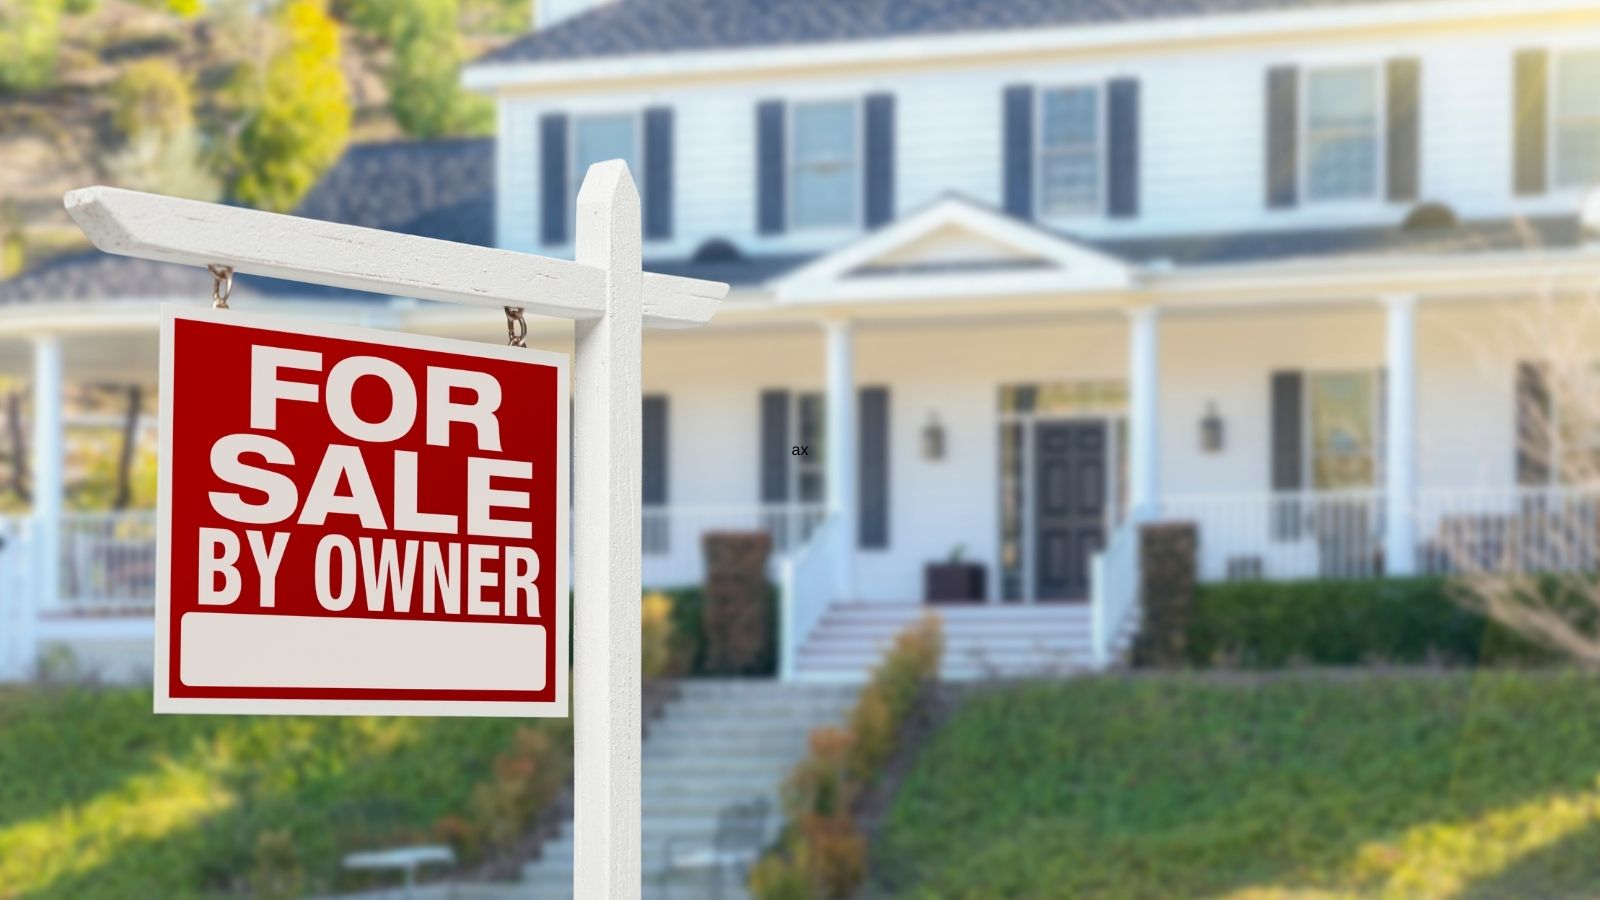 How To Buy A For Sale By Owner Home